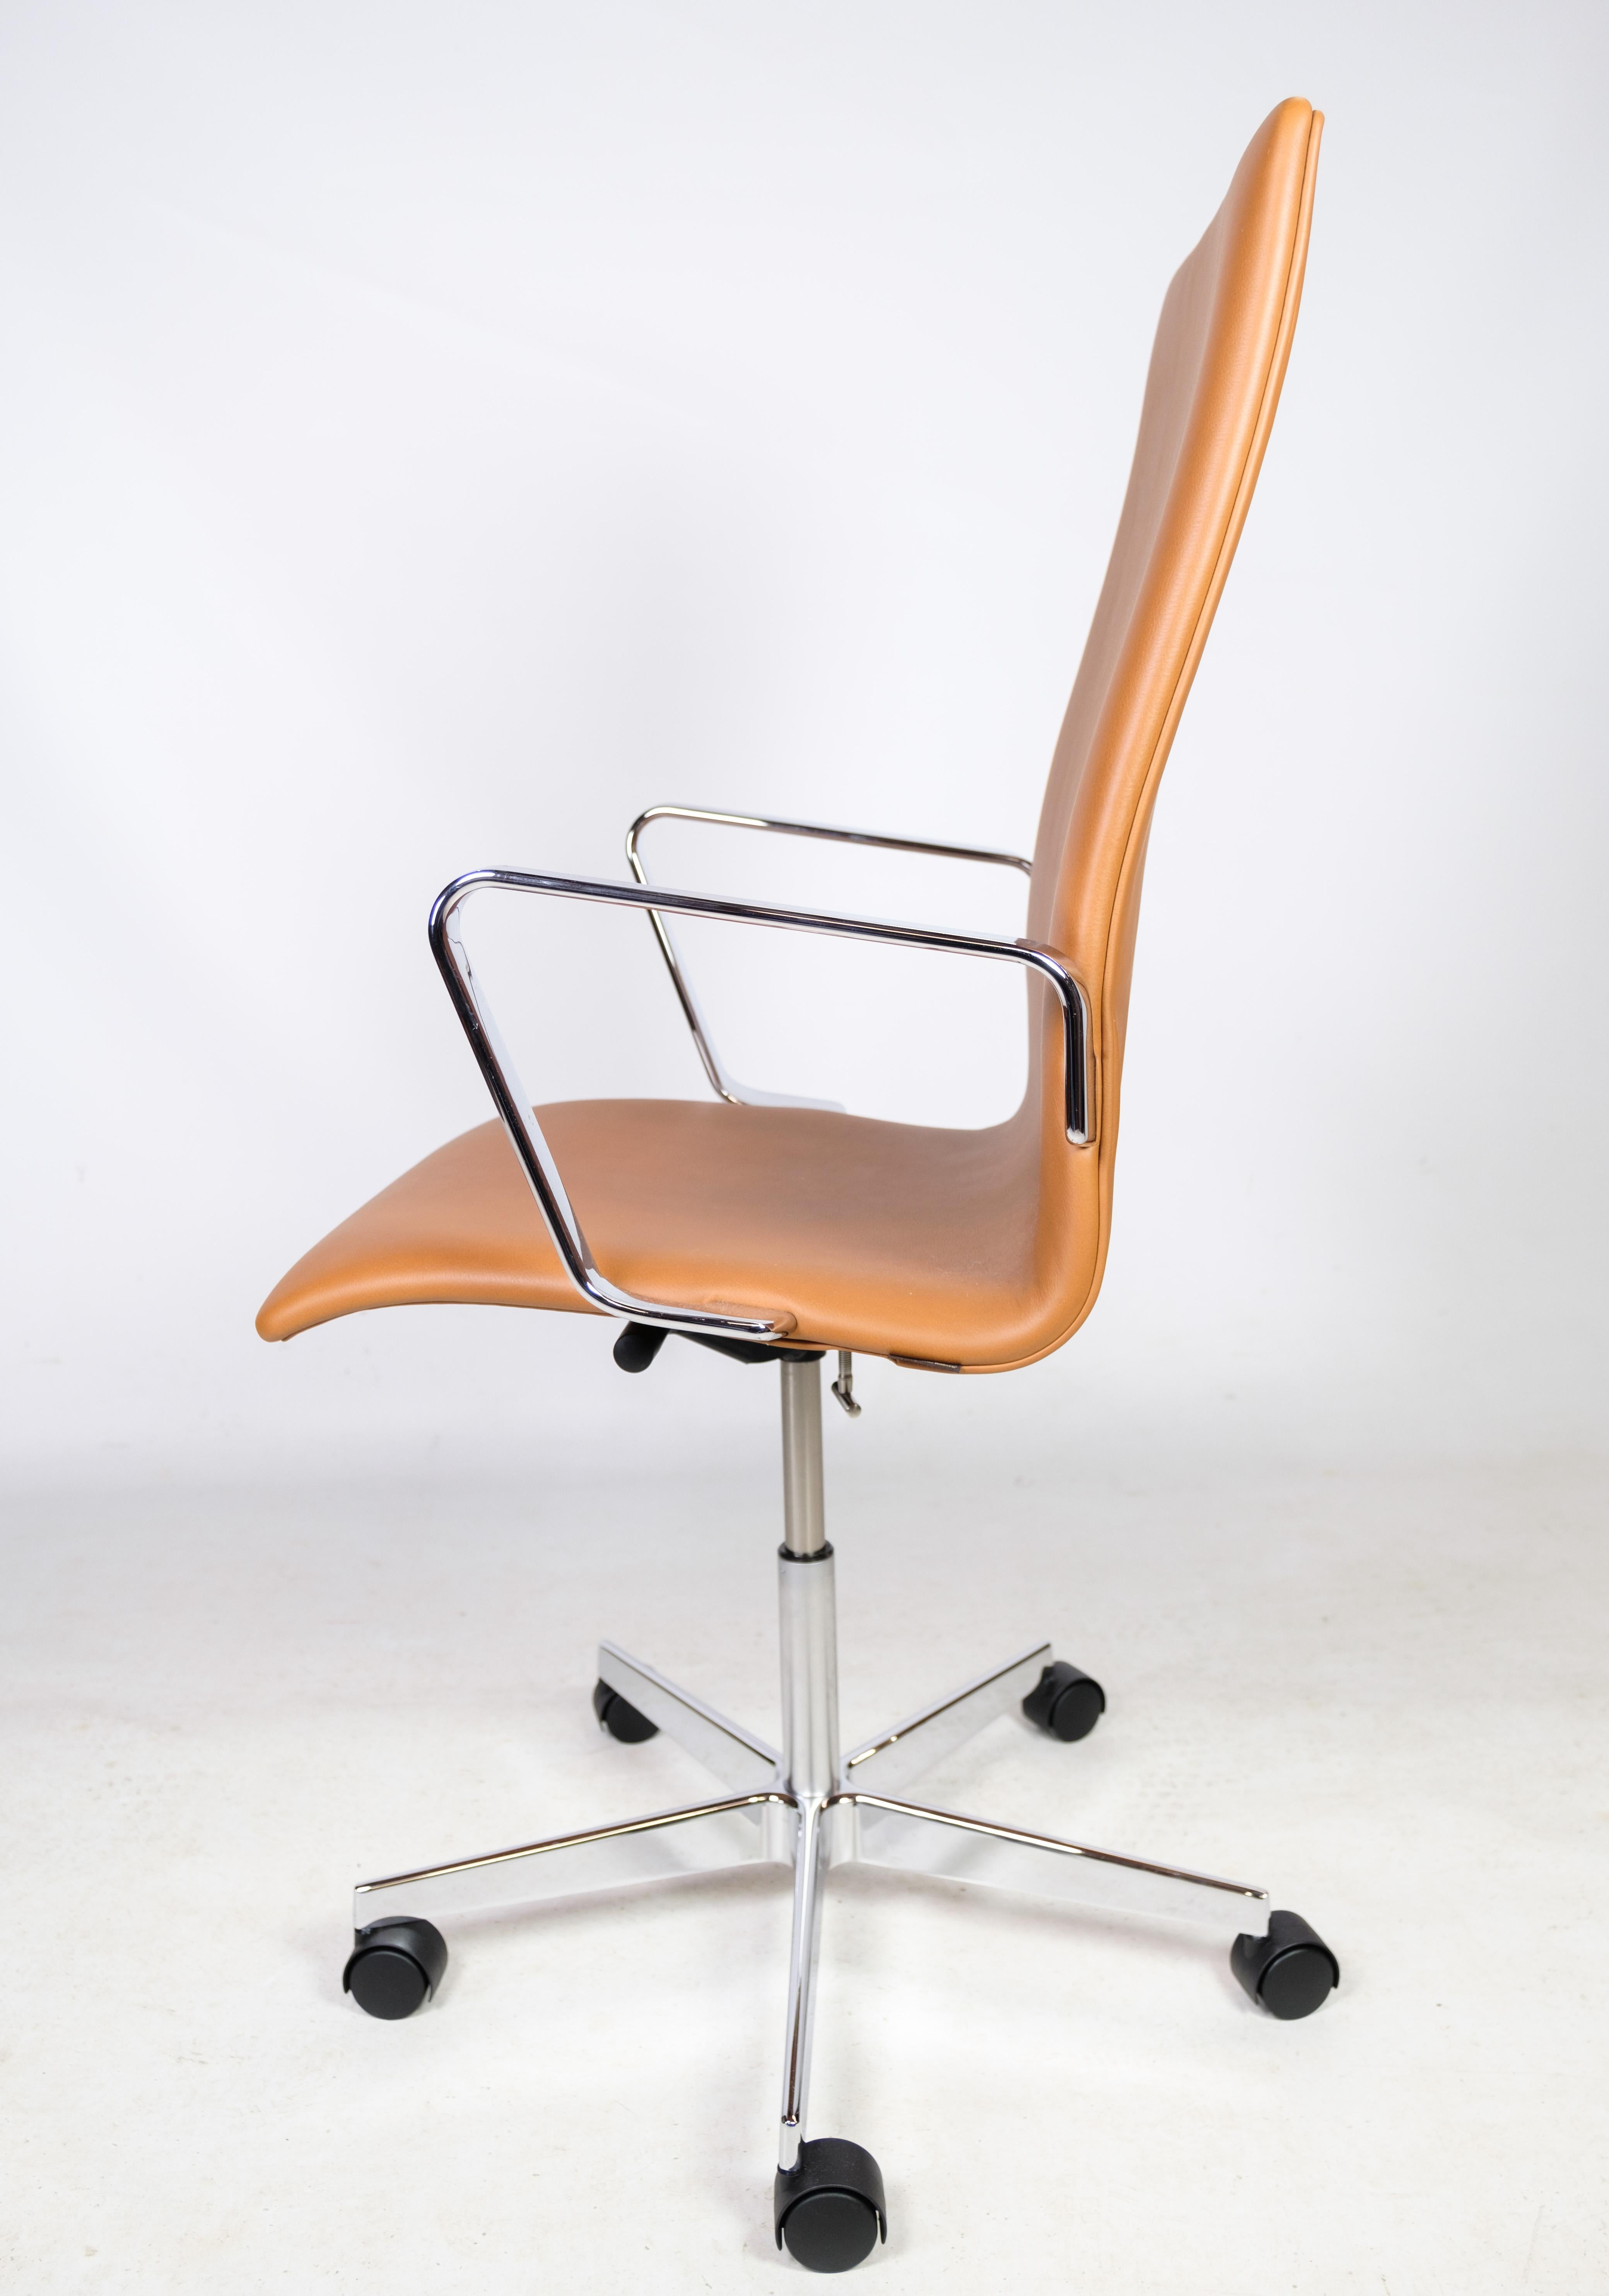 Oxford Classic Office Chair, Model 3293C, Cognac Leather, Arne Jacobsen, 1963 For Sale 4